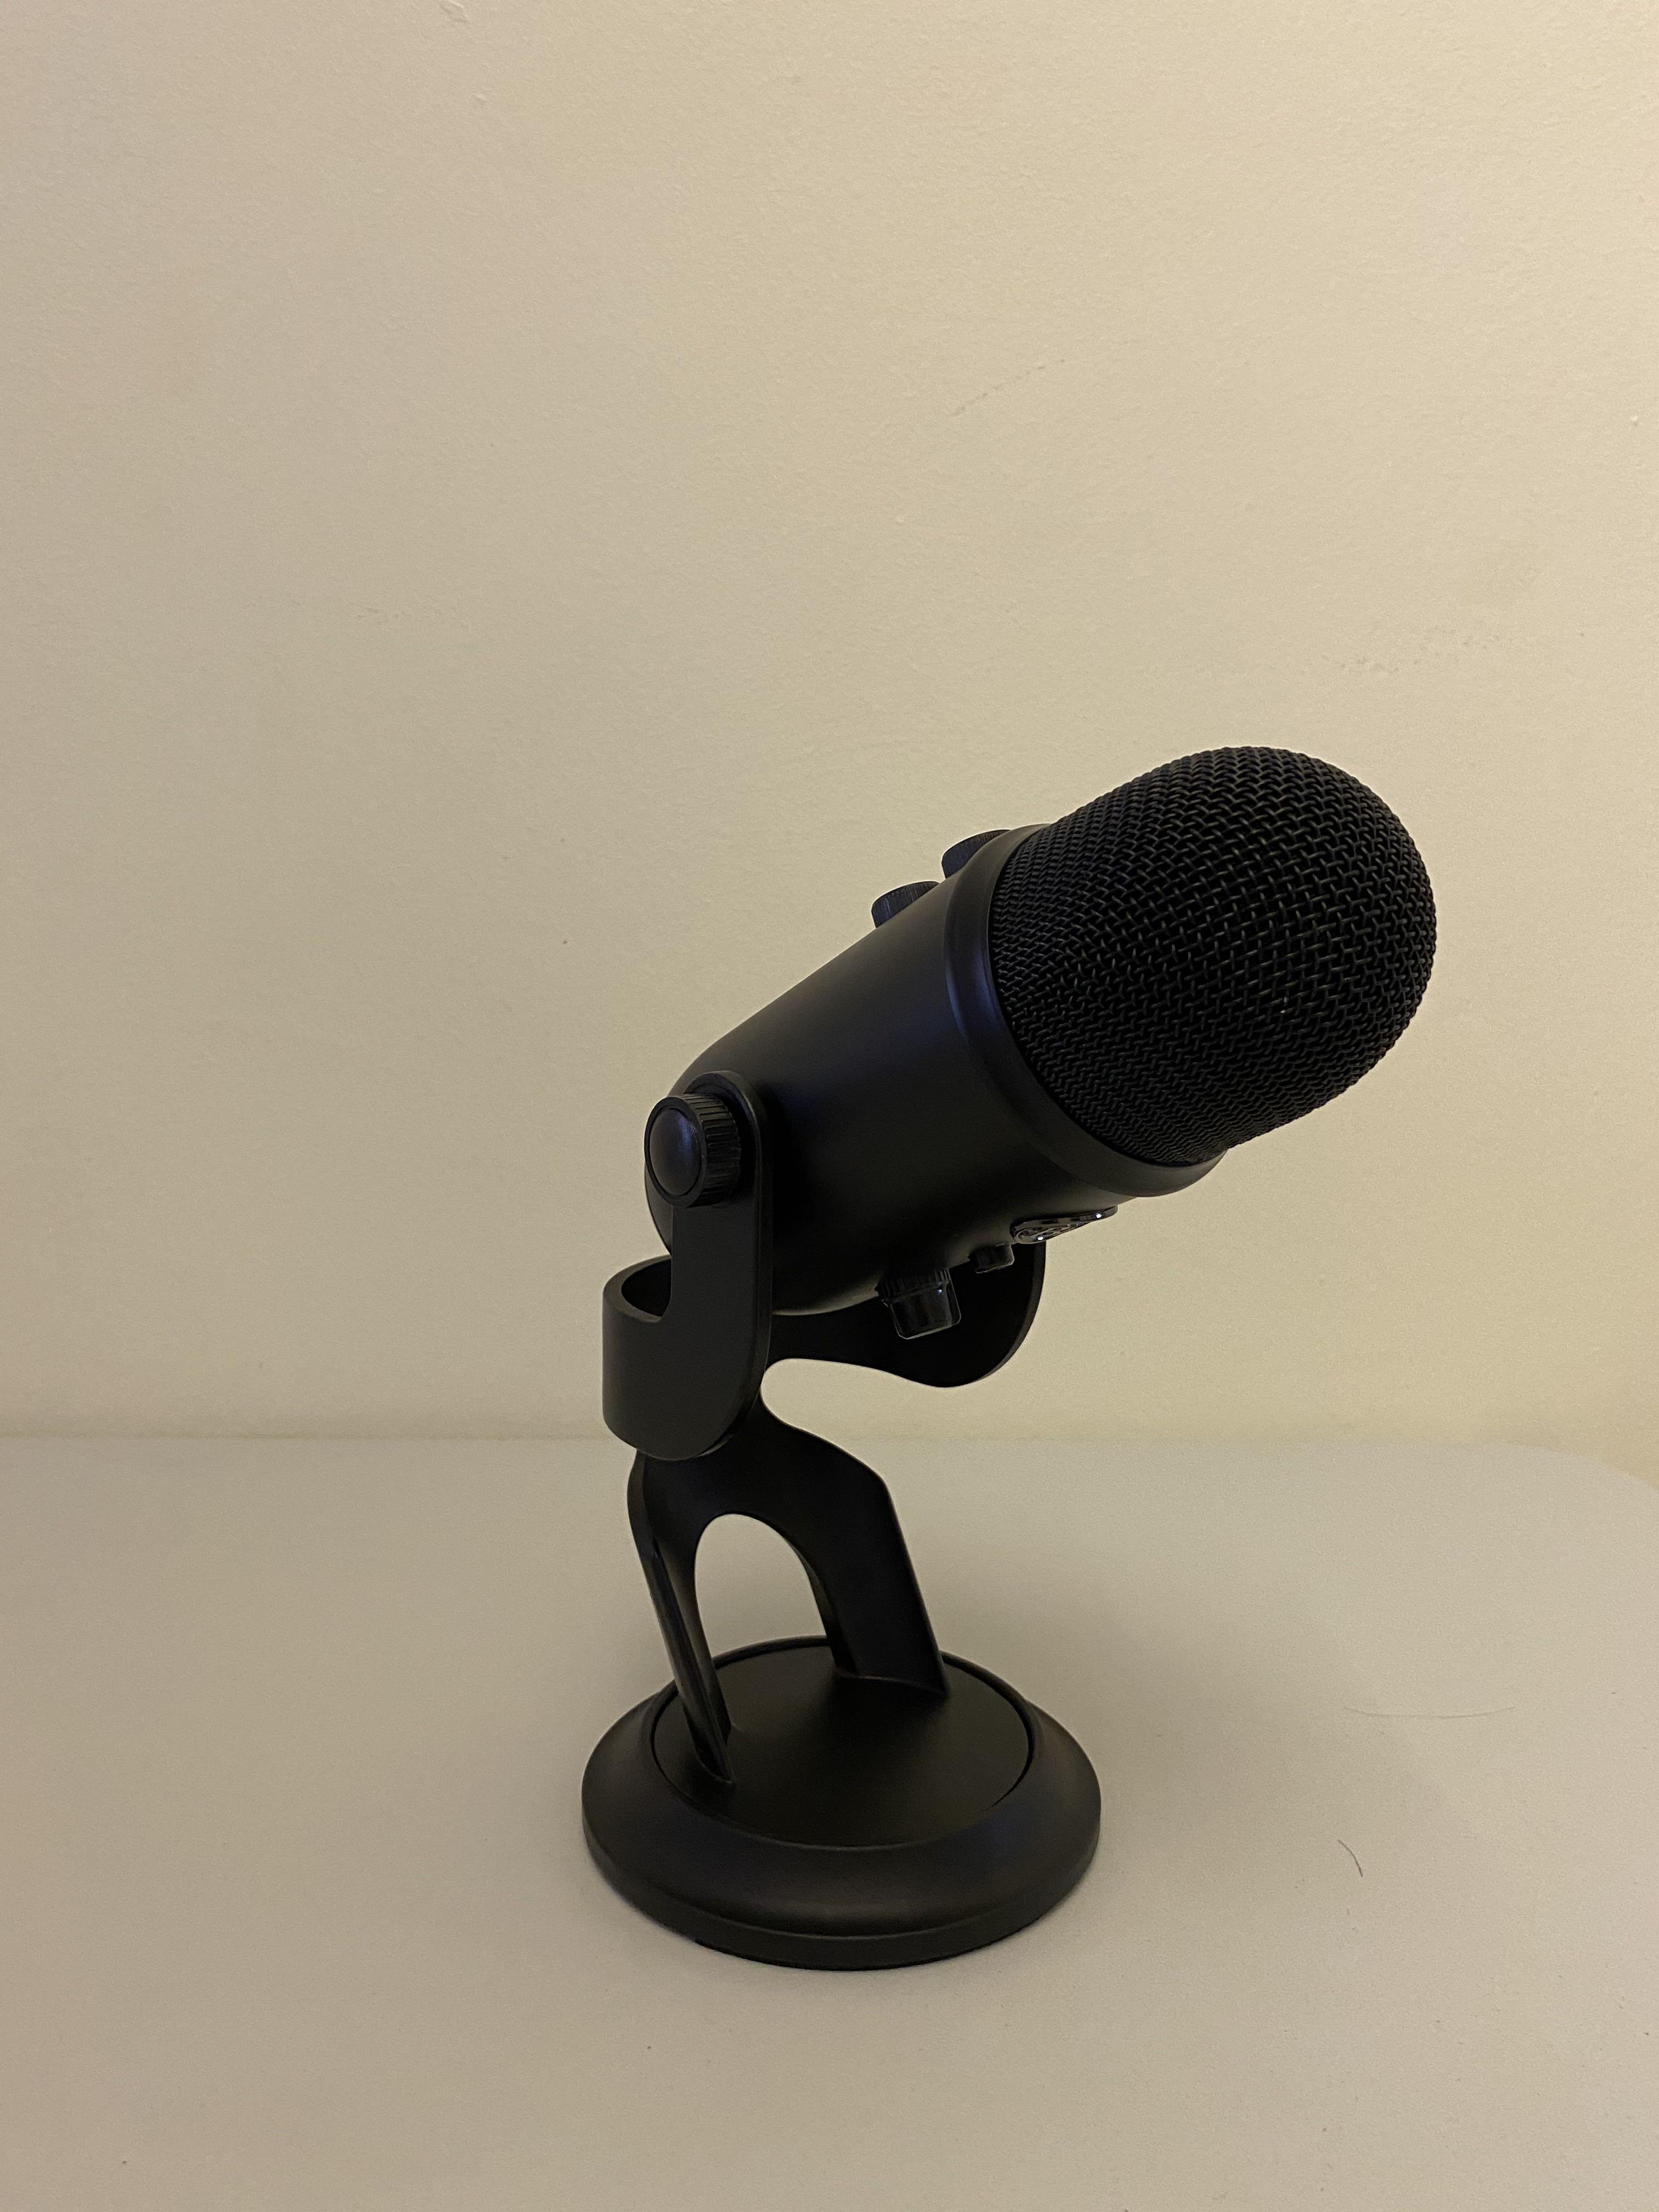 on　Microphones　Carousell　MICROPHONE,　NEW　BRAND　Audio,